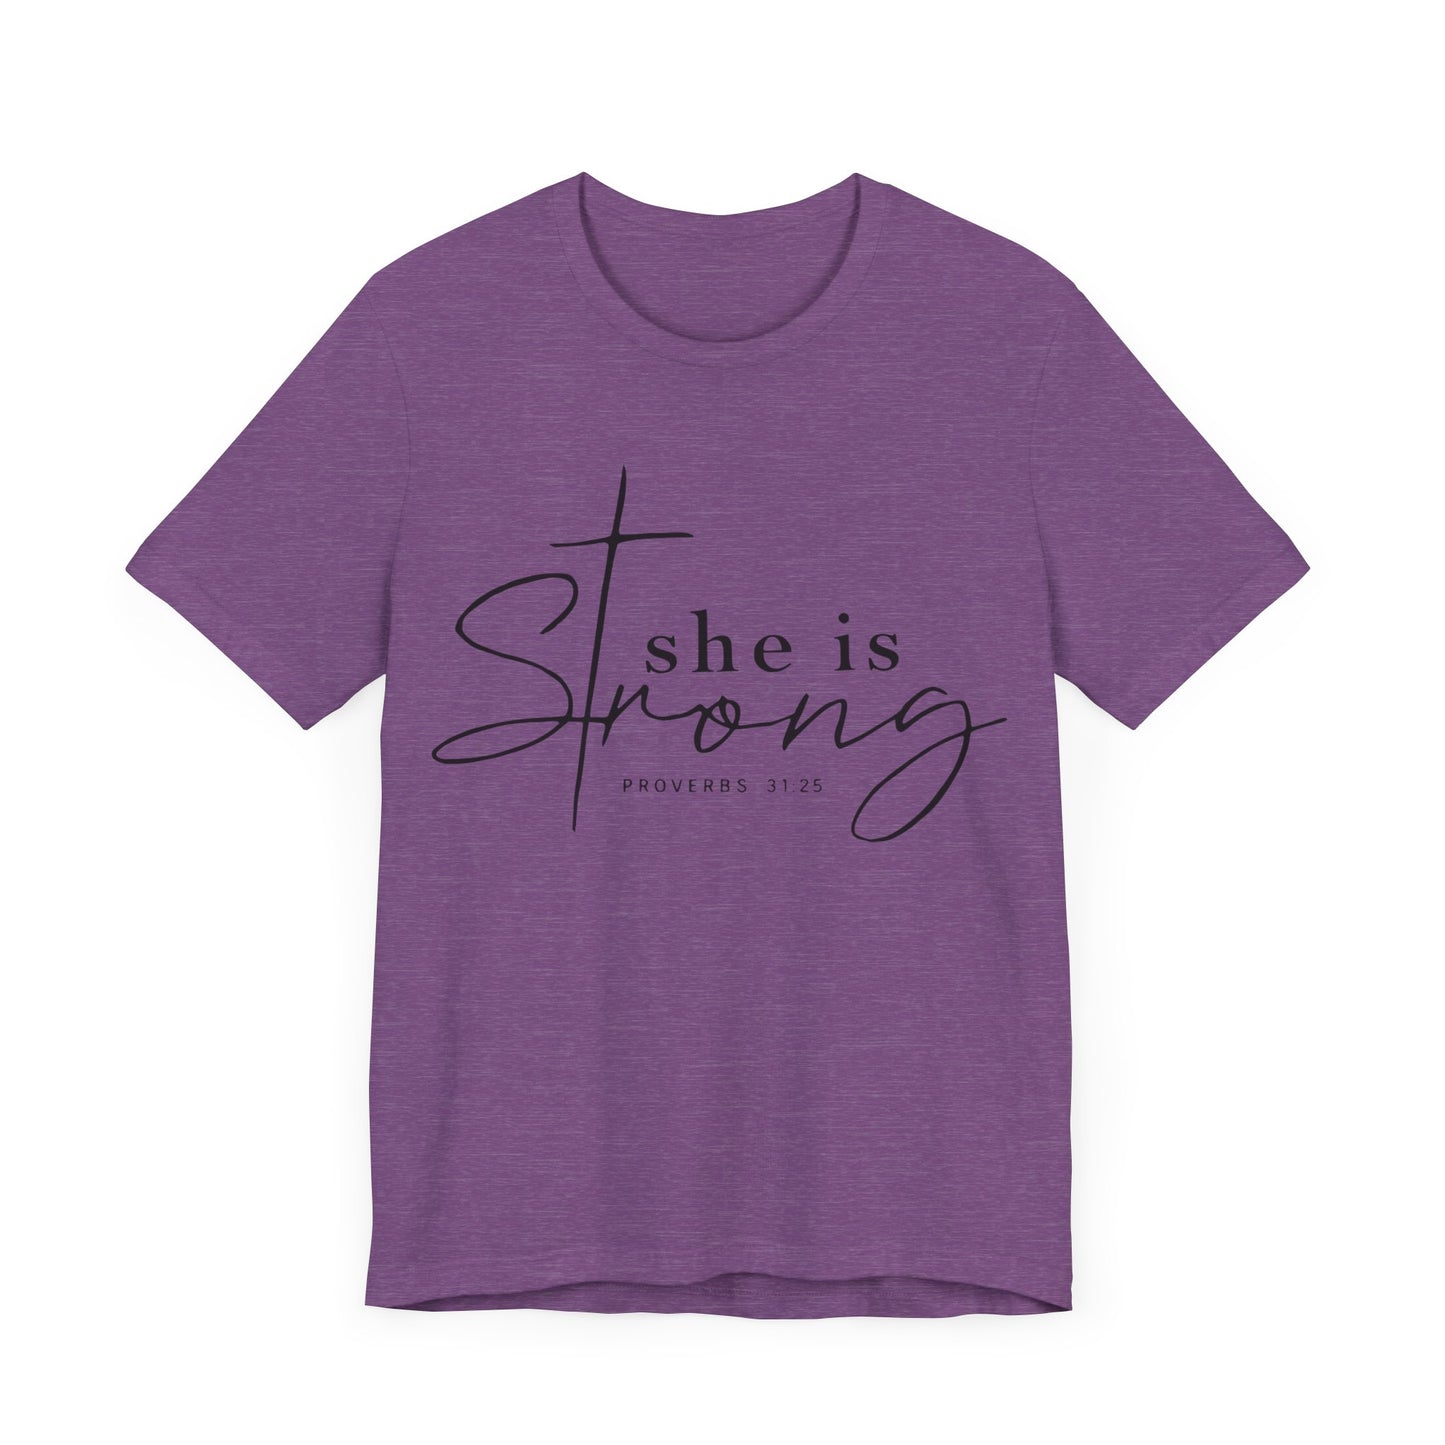 "Ethically Made 'She is Strong' T-Shirt with Biblical Verse"